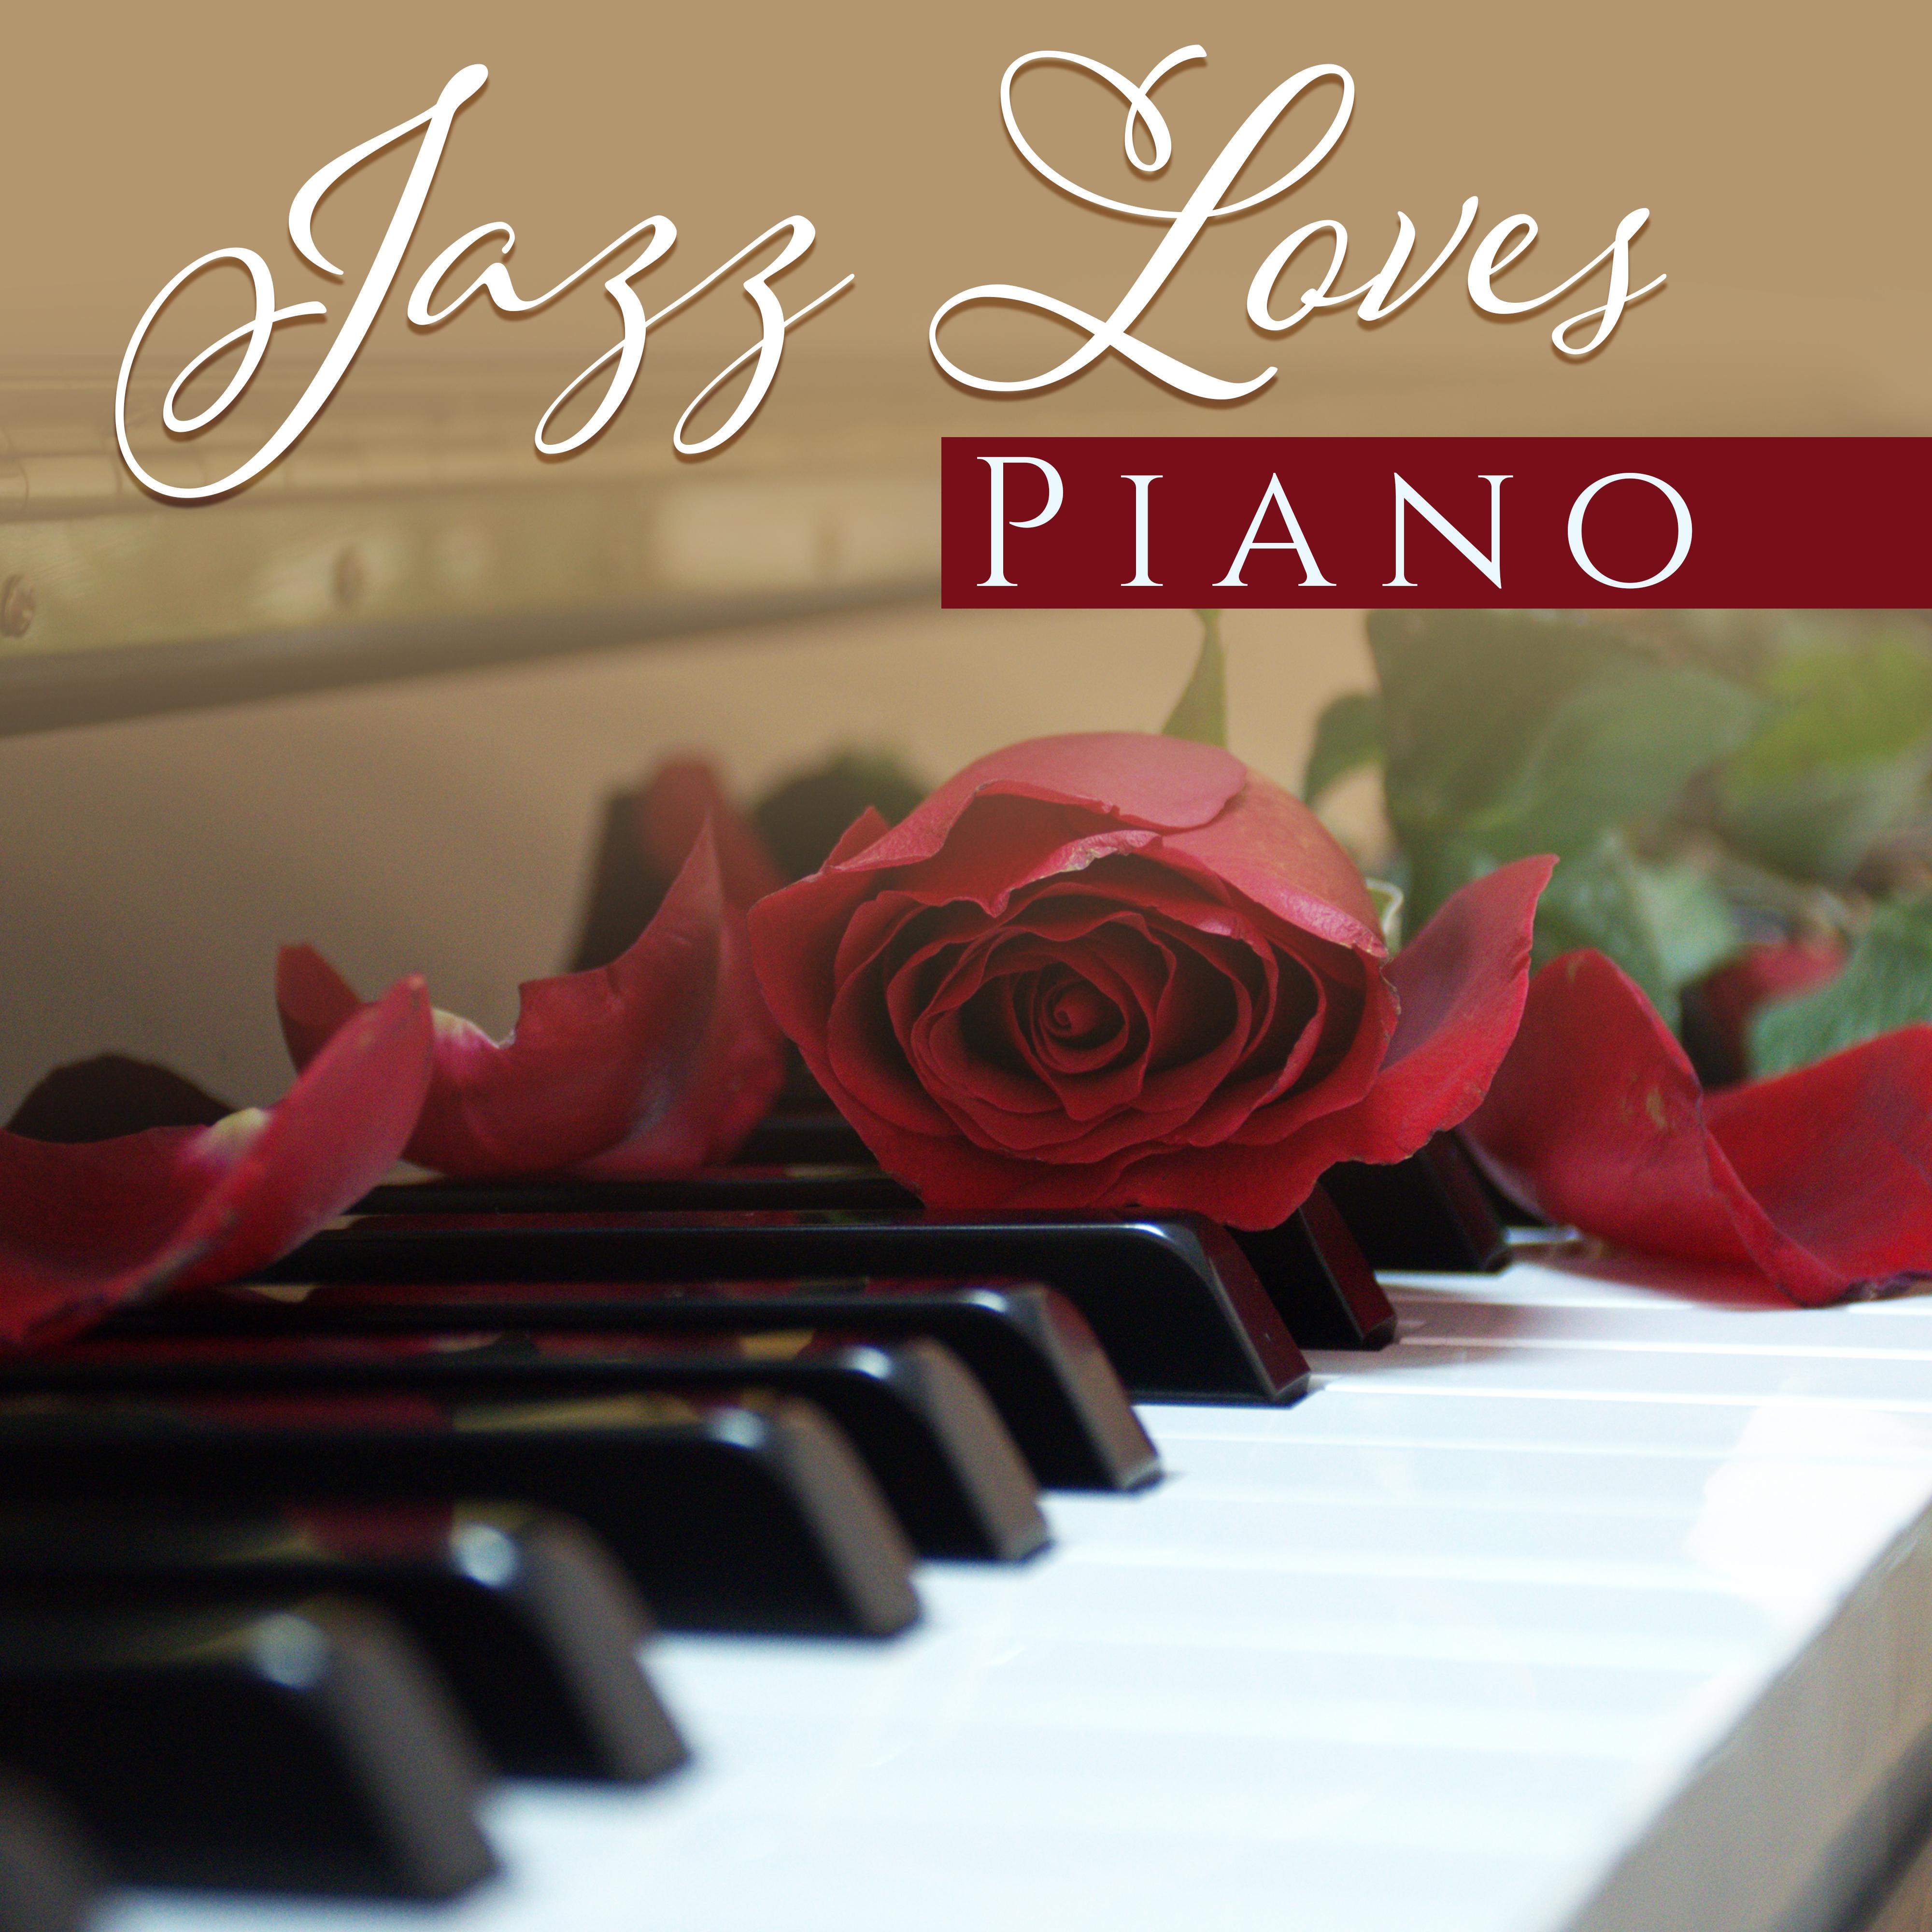 Jazz Loves Piano  15 Relaxing Songs to Rest, Mellow Jazz, Stress Relief, Soft Music After Work